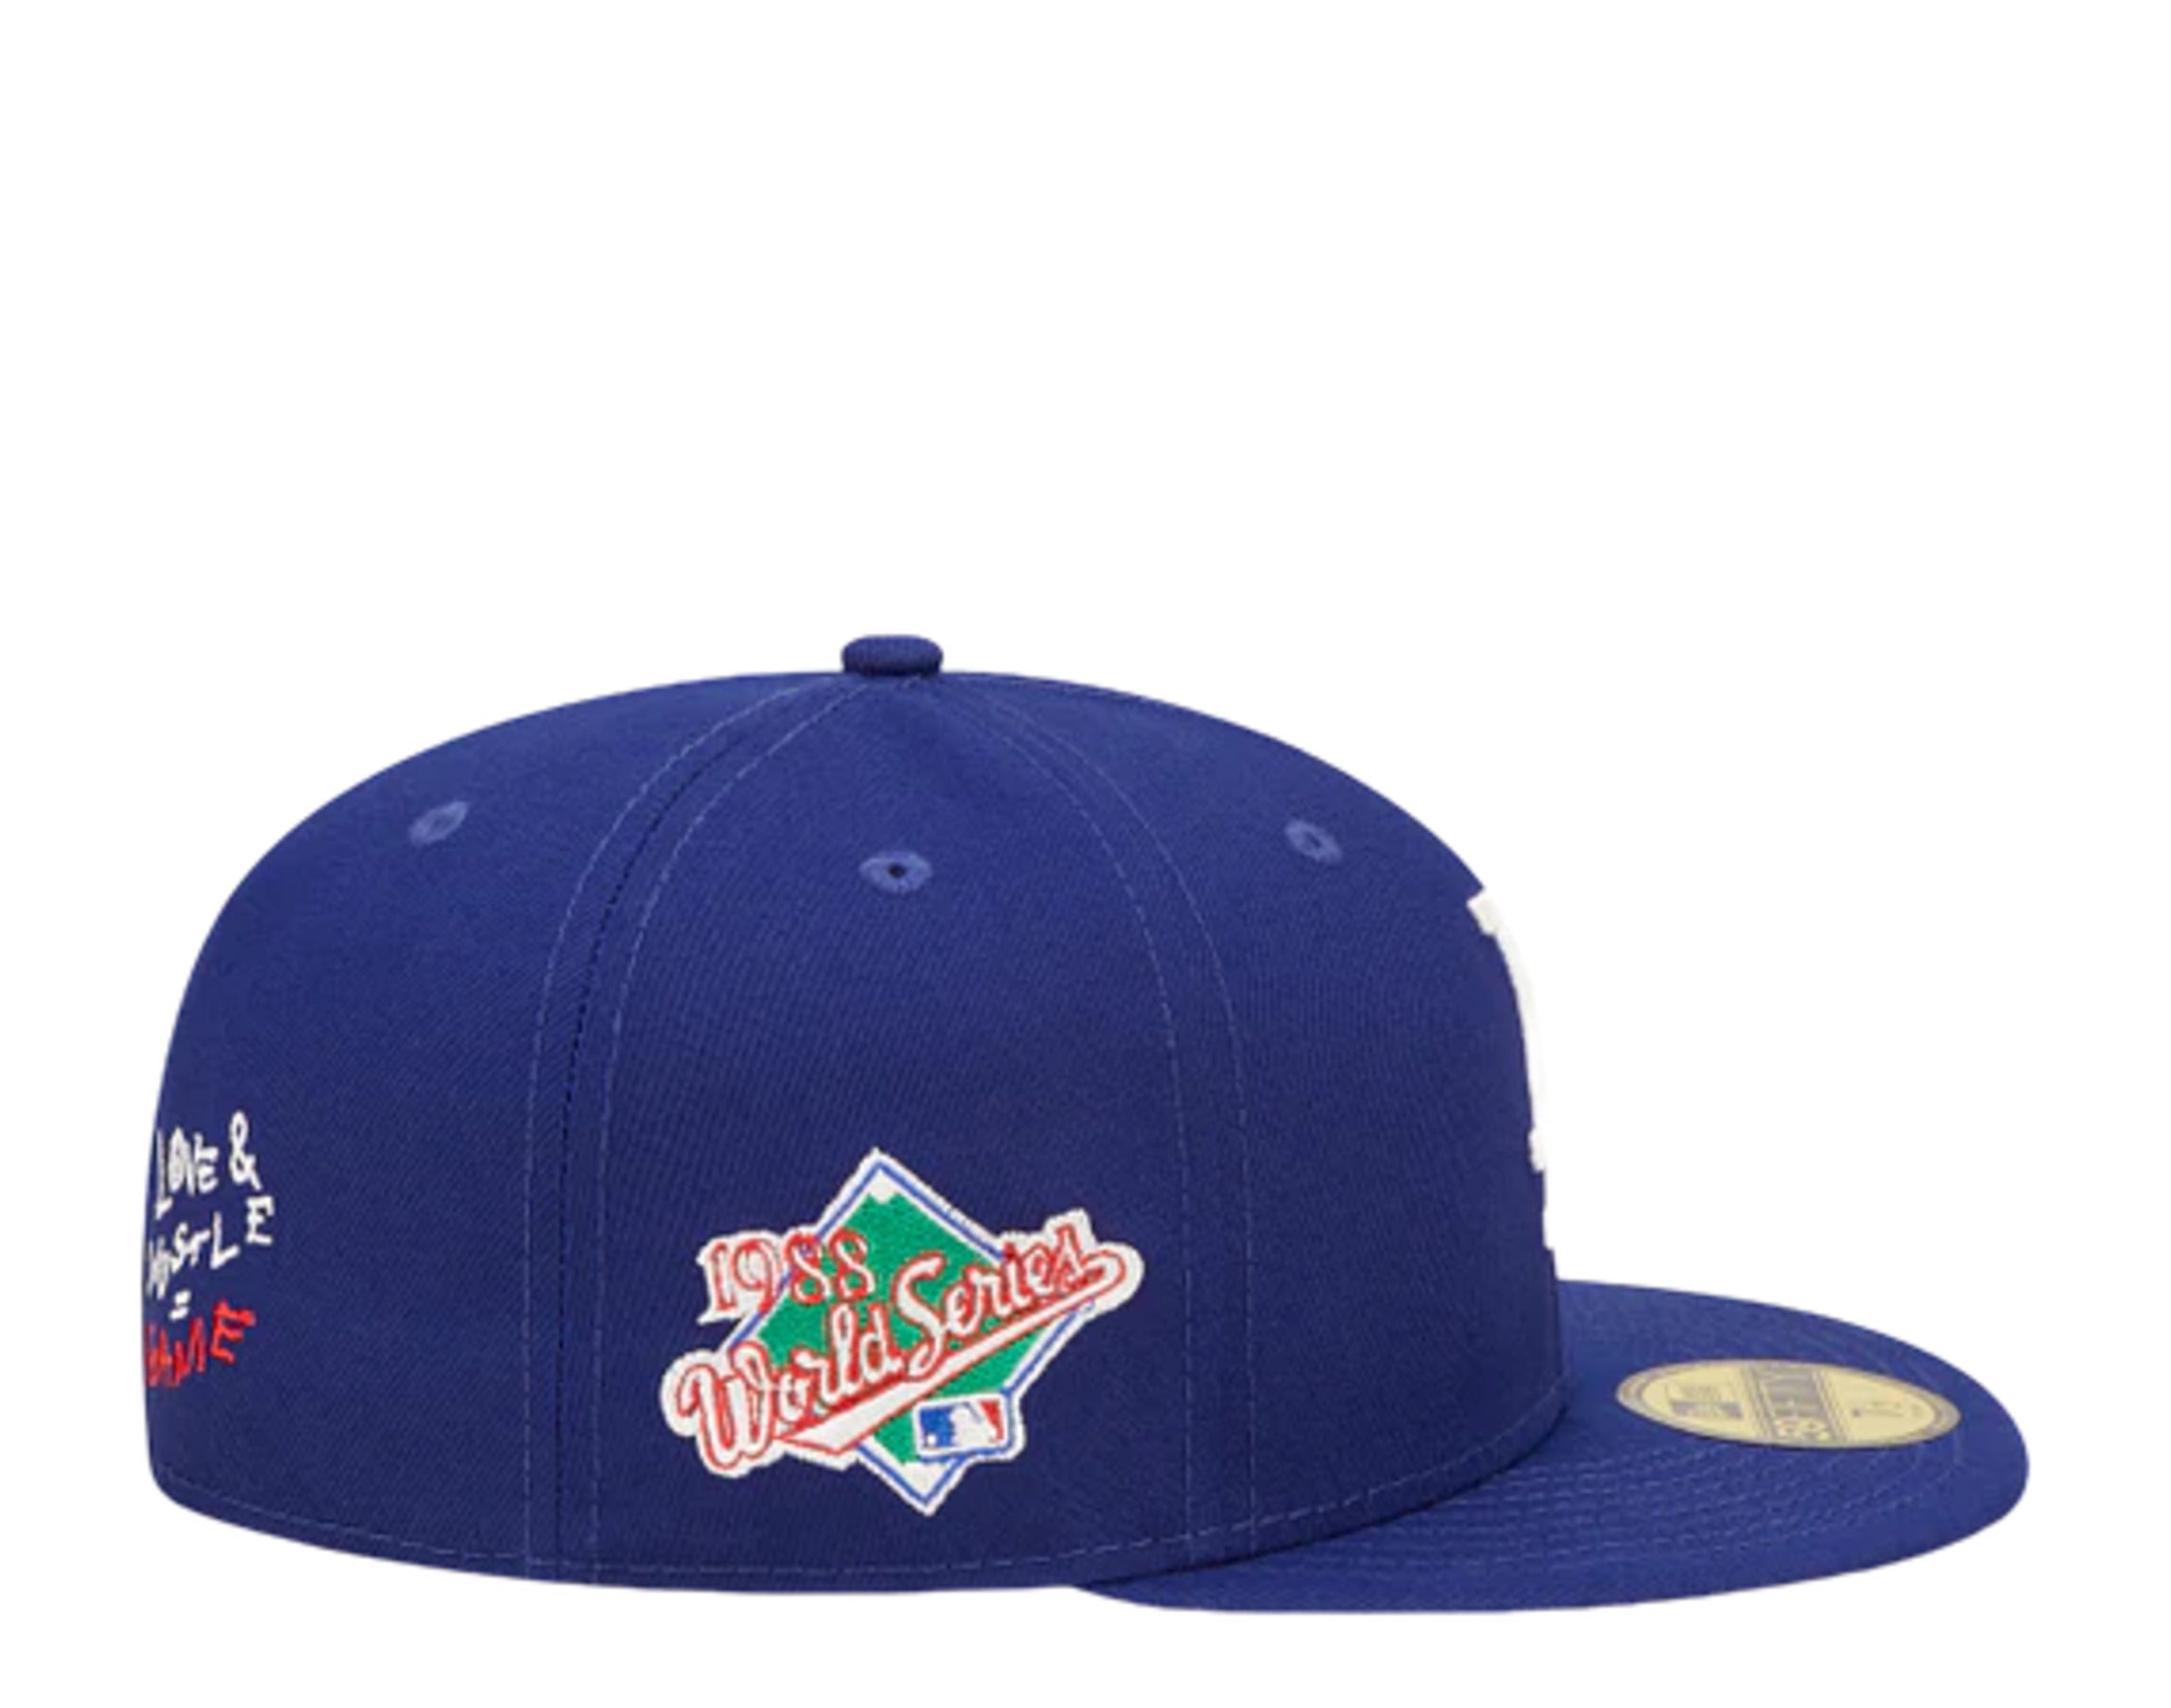 59FIFTY LOS ANGELES DODGERS TEAM HEART FITTED CAP BLUE